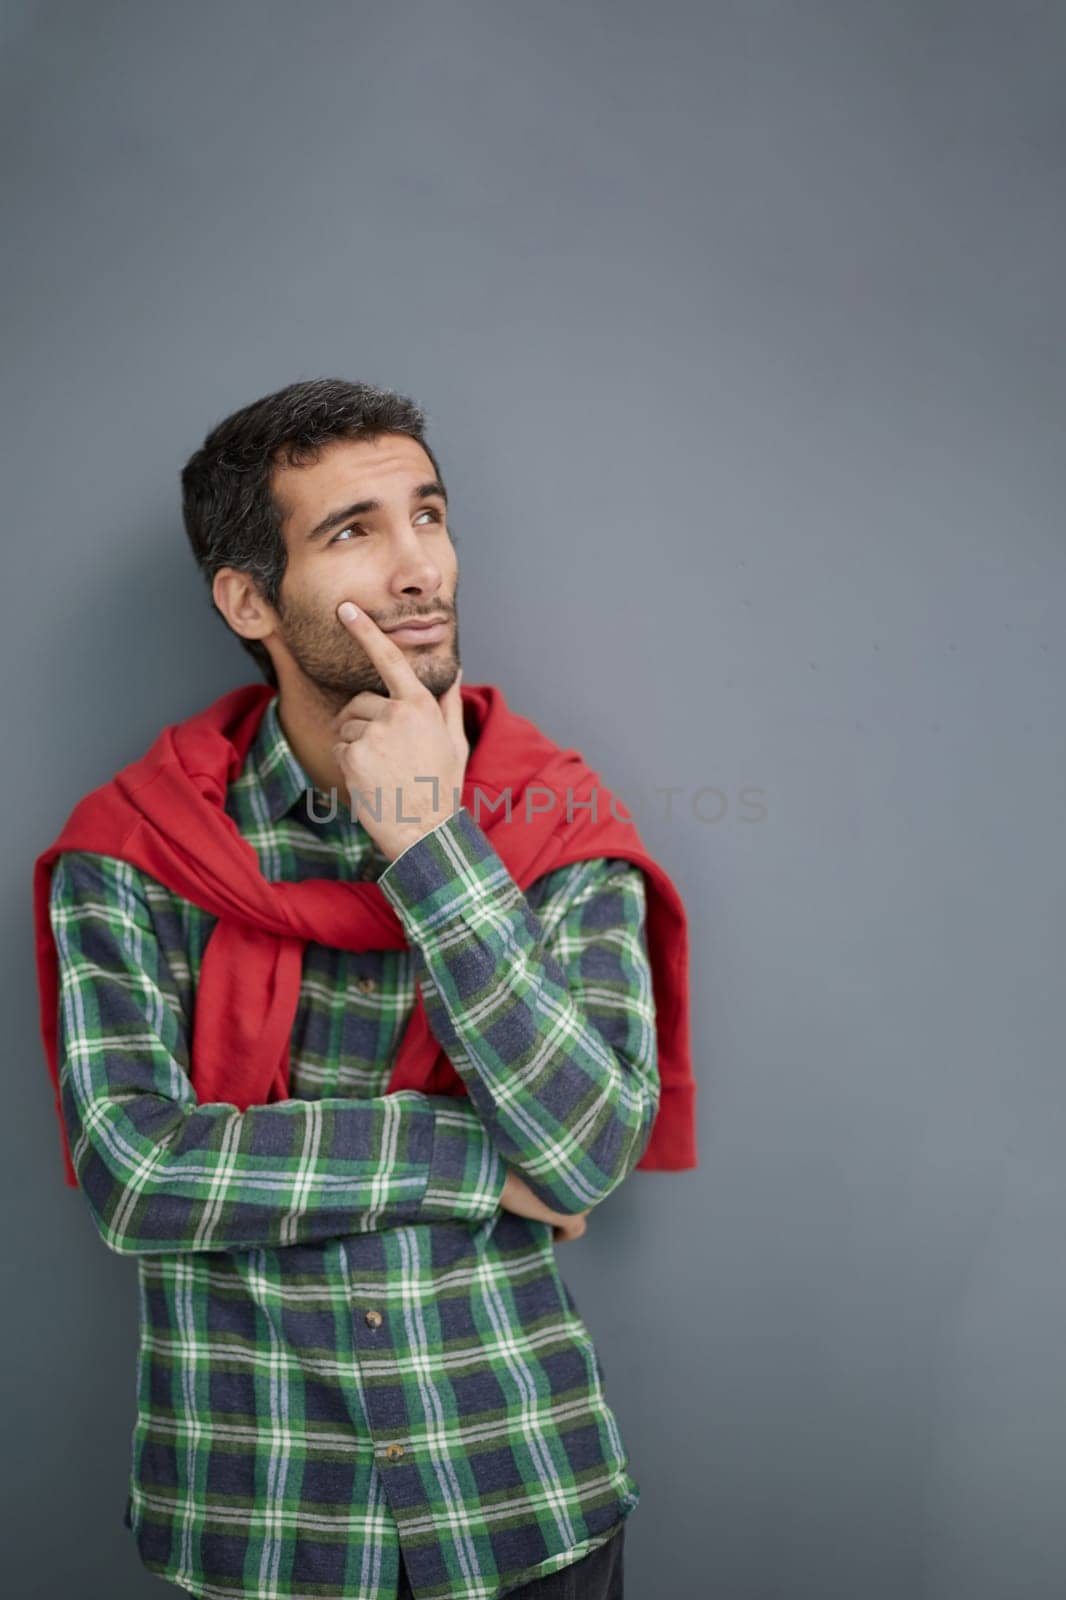 Handsome man in a plaid shirt on a gray background